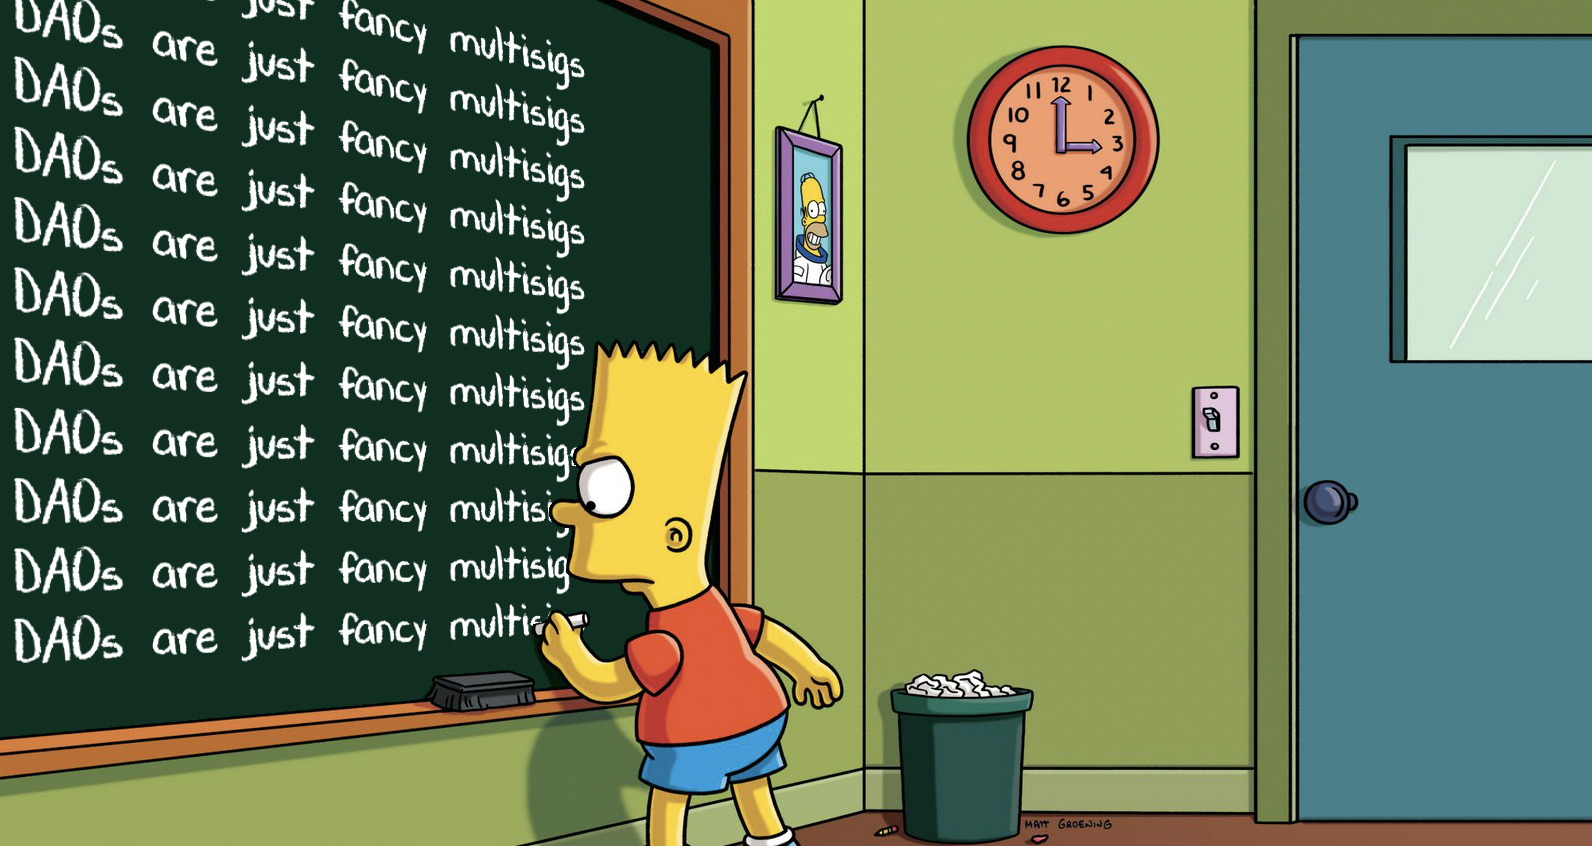 Bart Simpson writing "DAOs are just fancy multisigs".